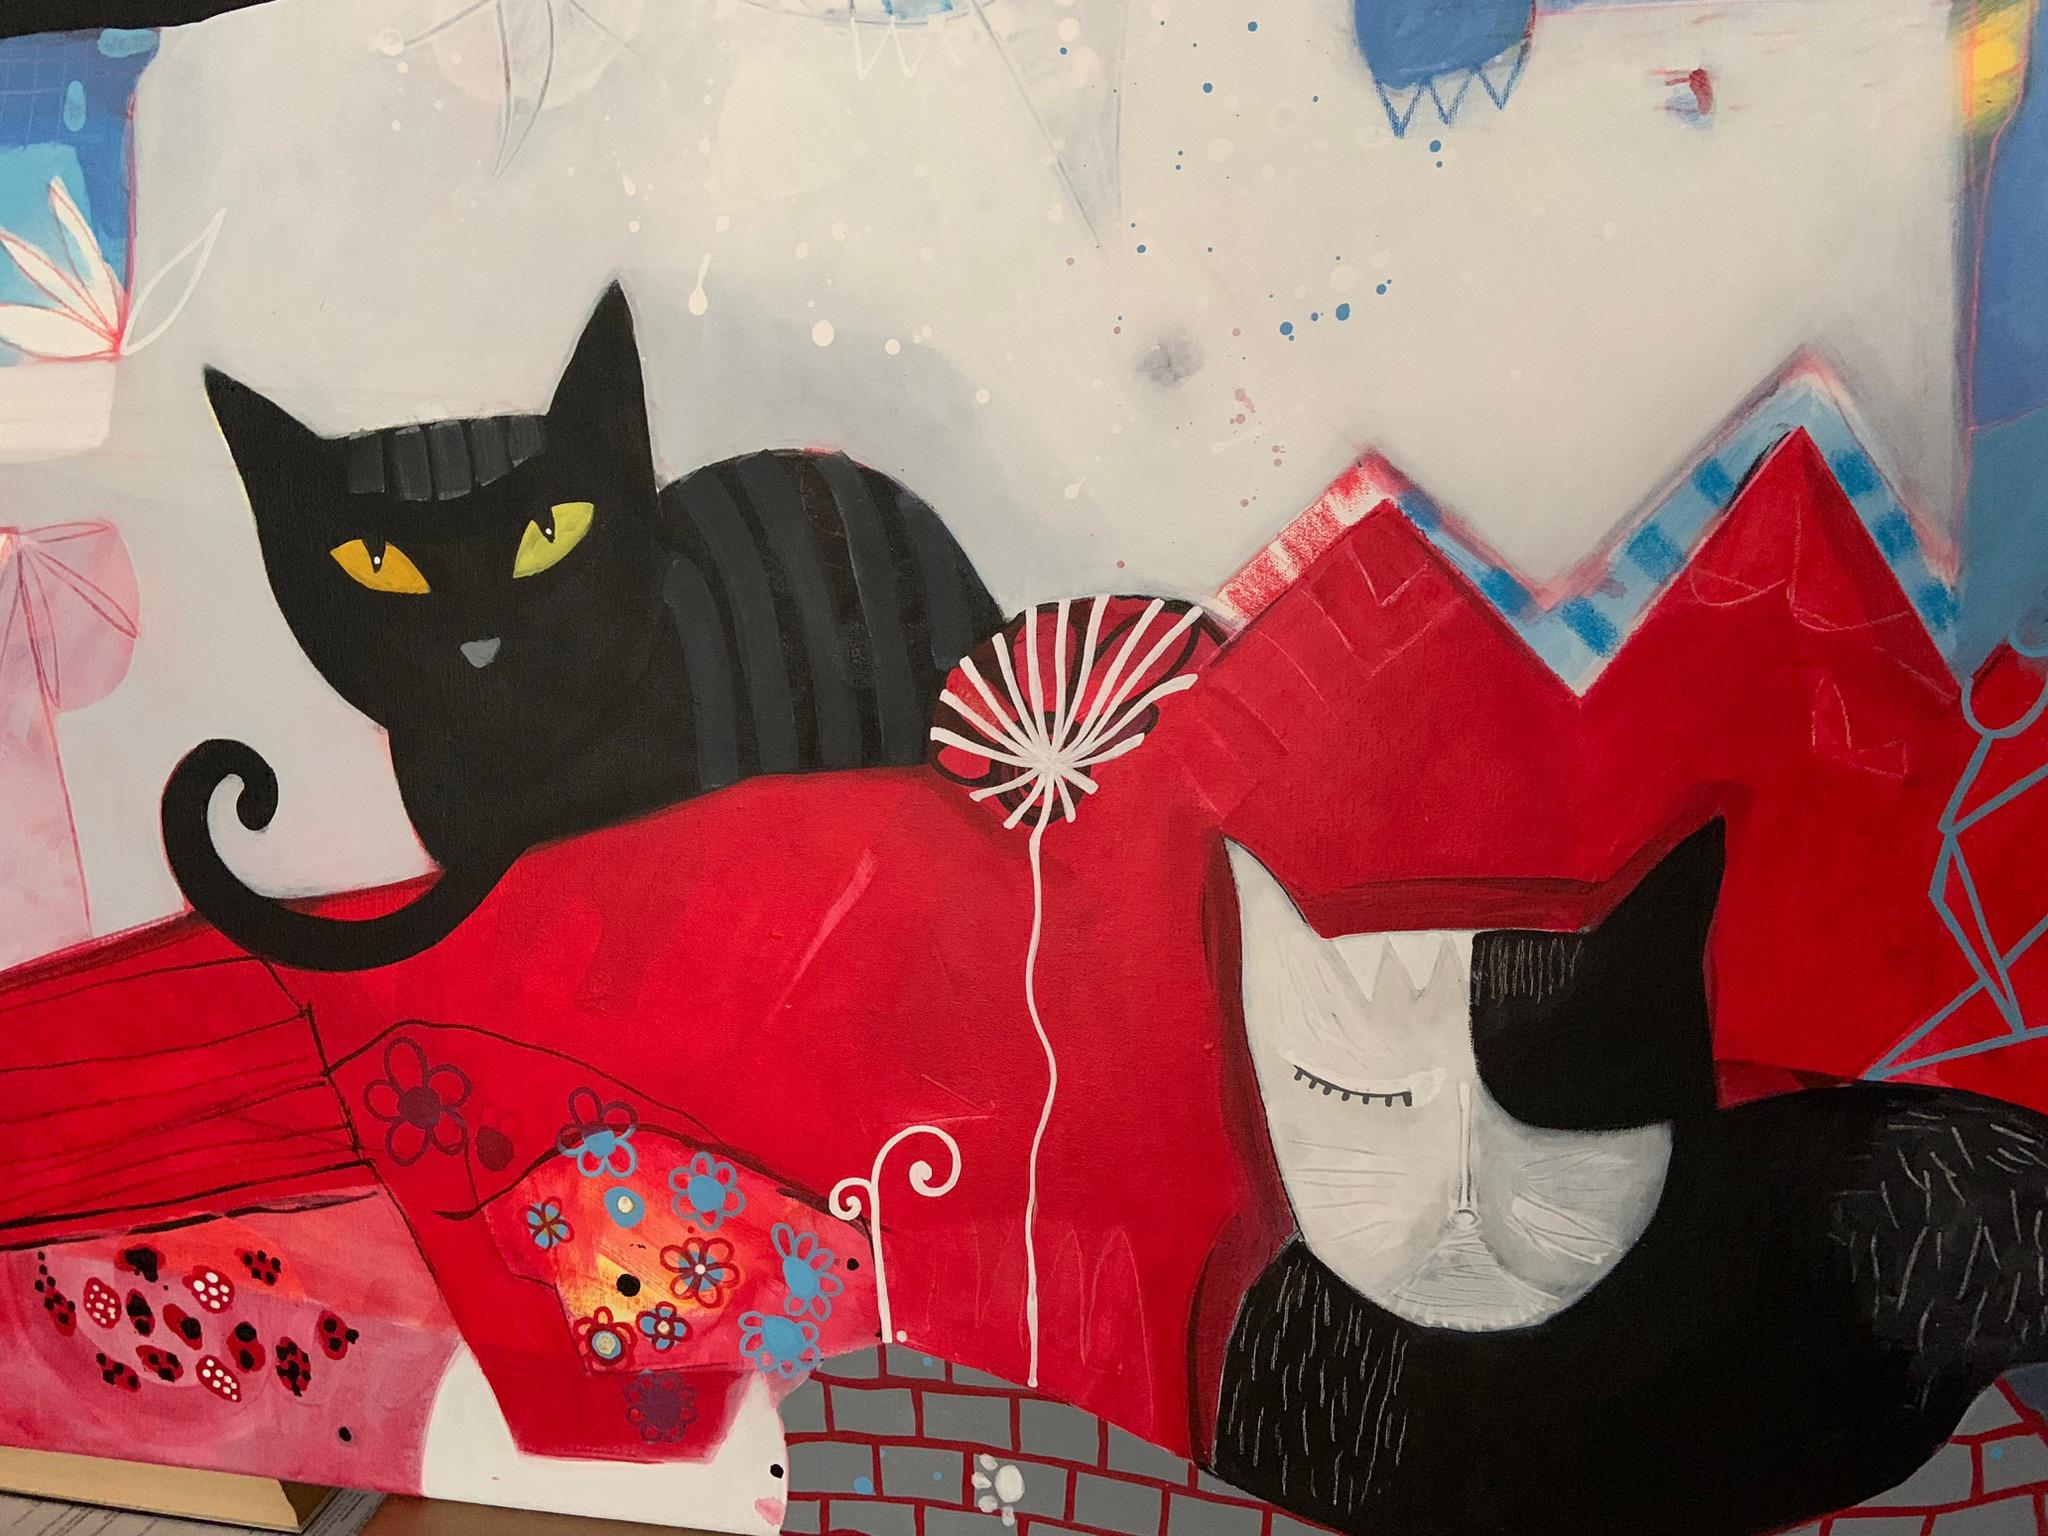 Cats On The Roof Large Painting With Cats In Abstraction
Do to the size we will ship the painting rolled up with out the stretcher. 
Malgosia Kiernozycka was born in Wroclaw, Poland. She graduated high school at the School of Fine Arts and received